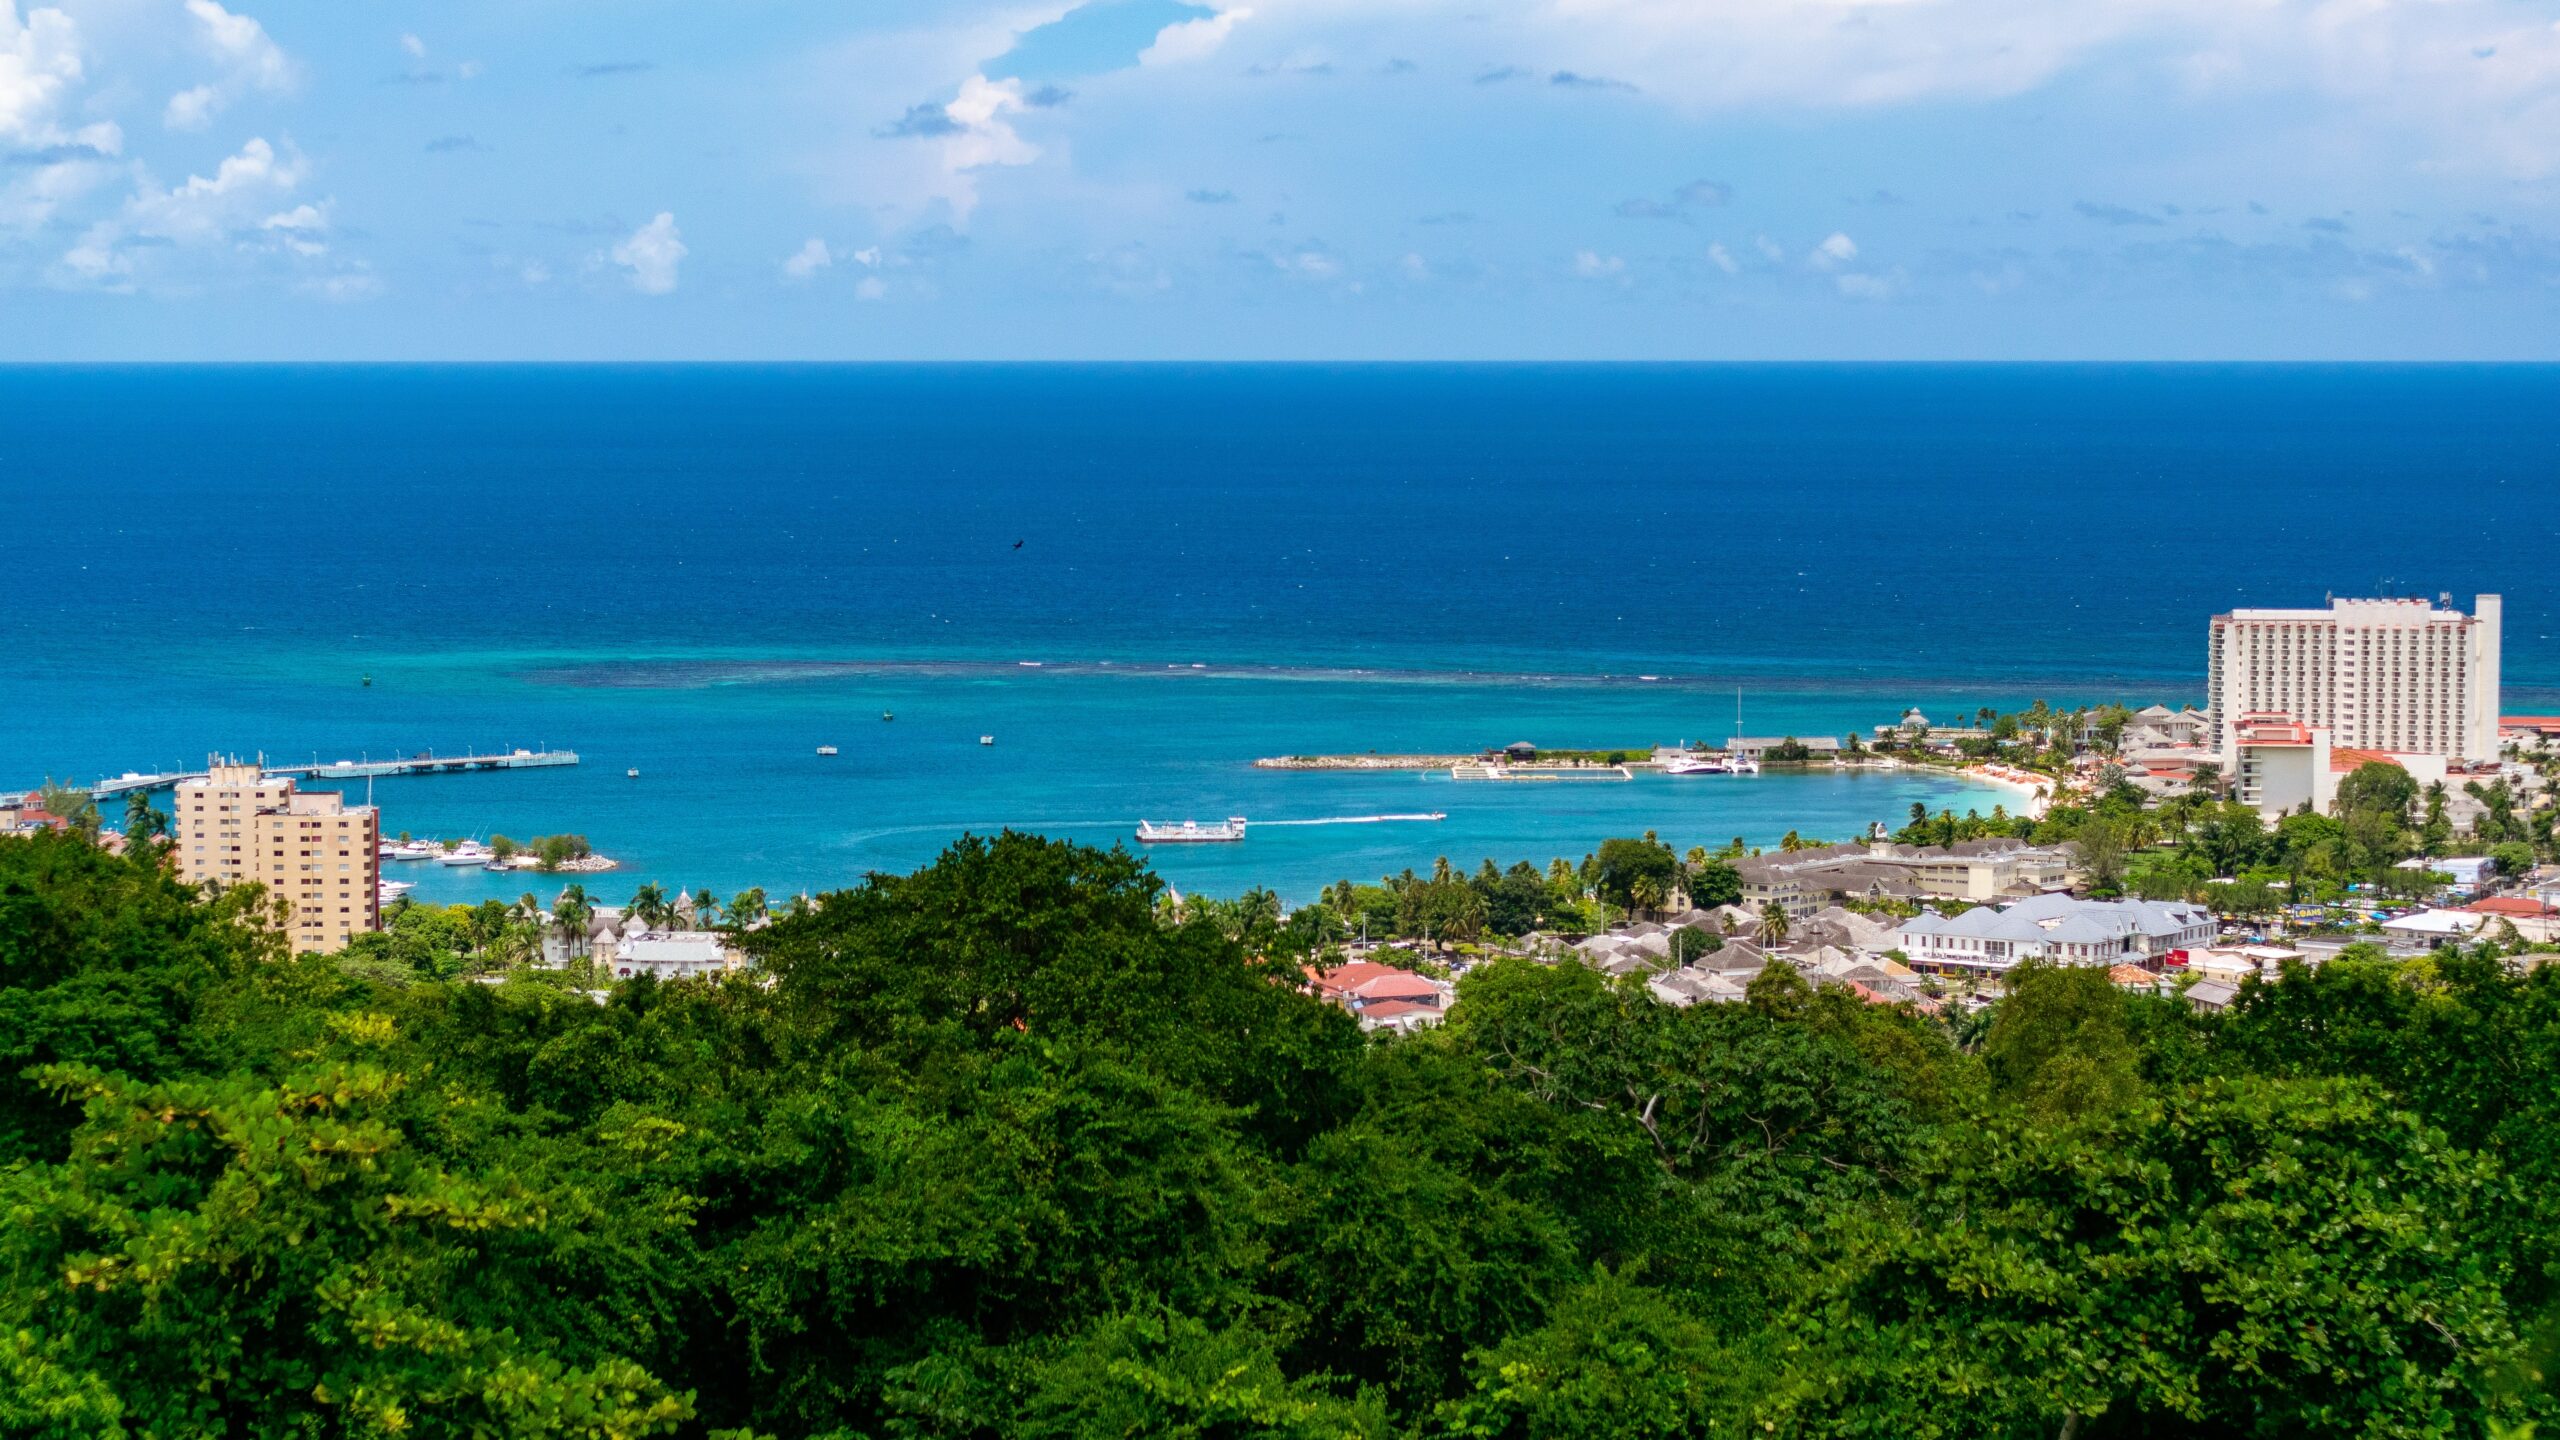 Aerial view to the Ocho Rios beach in Jamaica with clear blue waters and clear sky